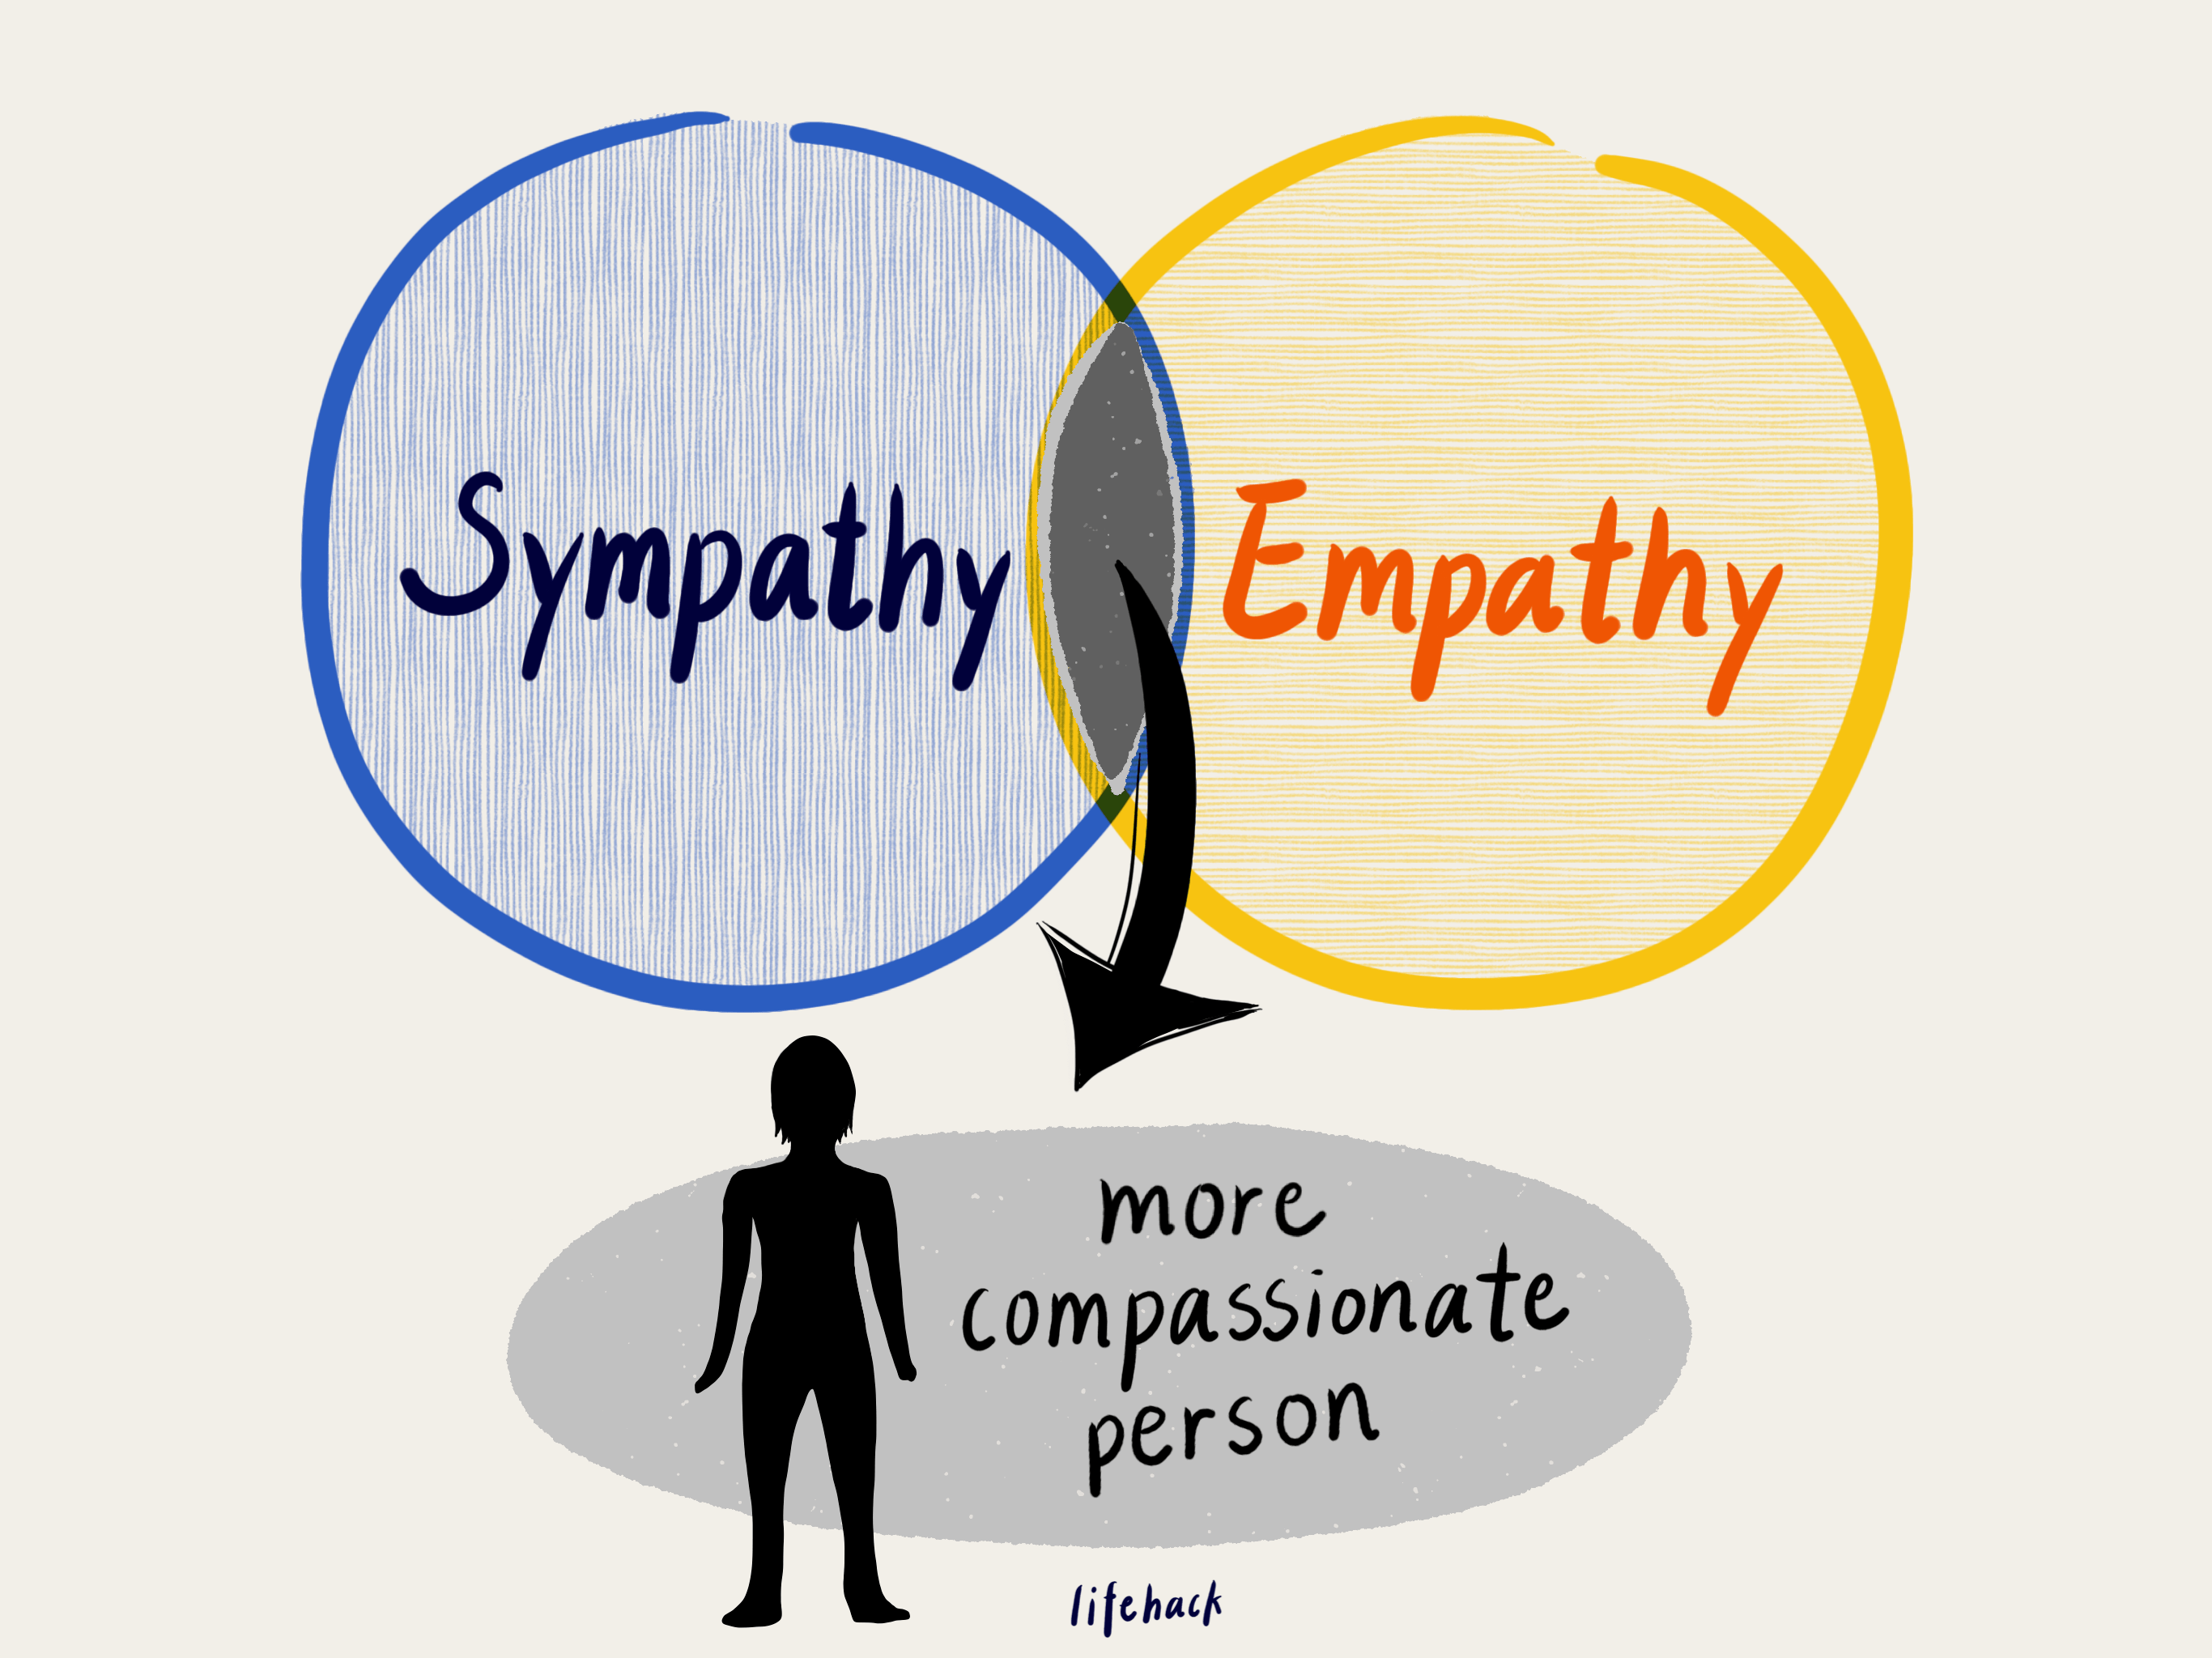 Empathy VS Sympathy: What Are The Key Differences?